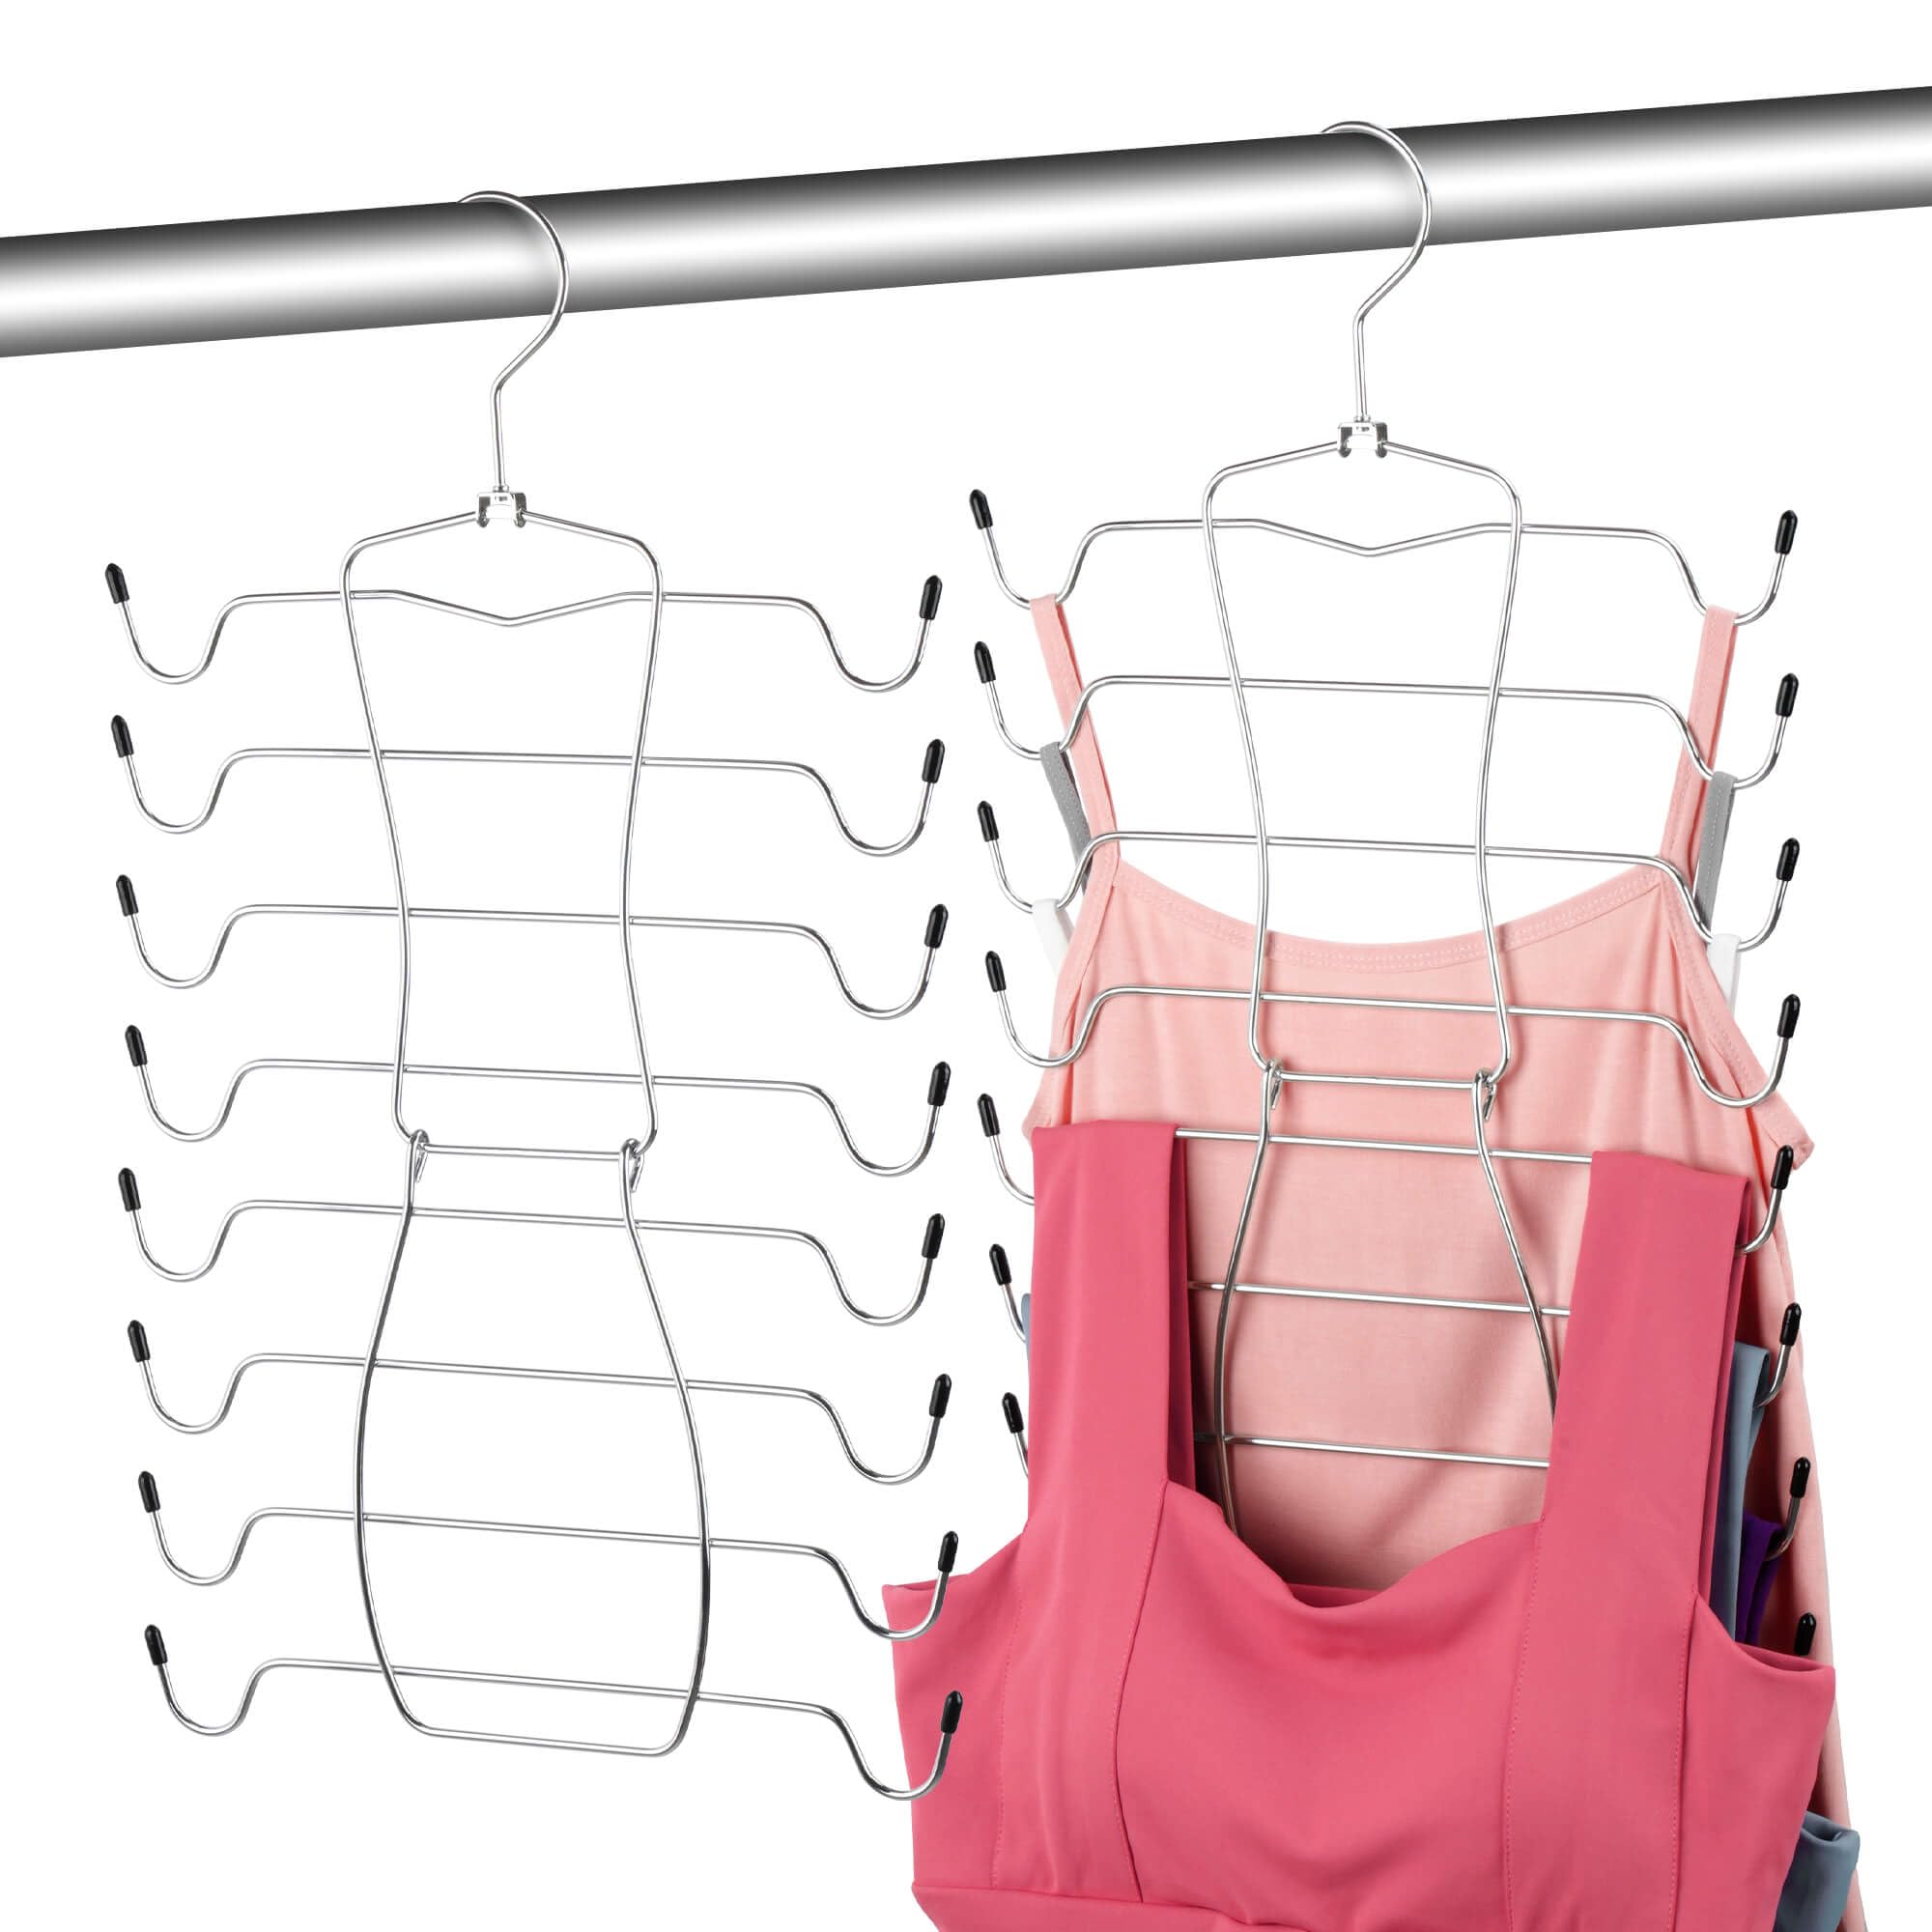 OMHOMETY 2 Pack Tank Top Hangers, Bra Organizer for Closet, Space Saving Closet Organizers and Storage, Dorm Room Essentials for College Students Girls, Silver